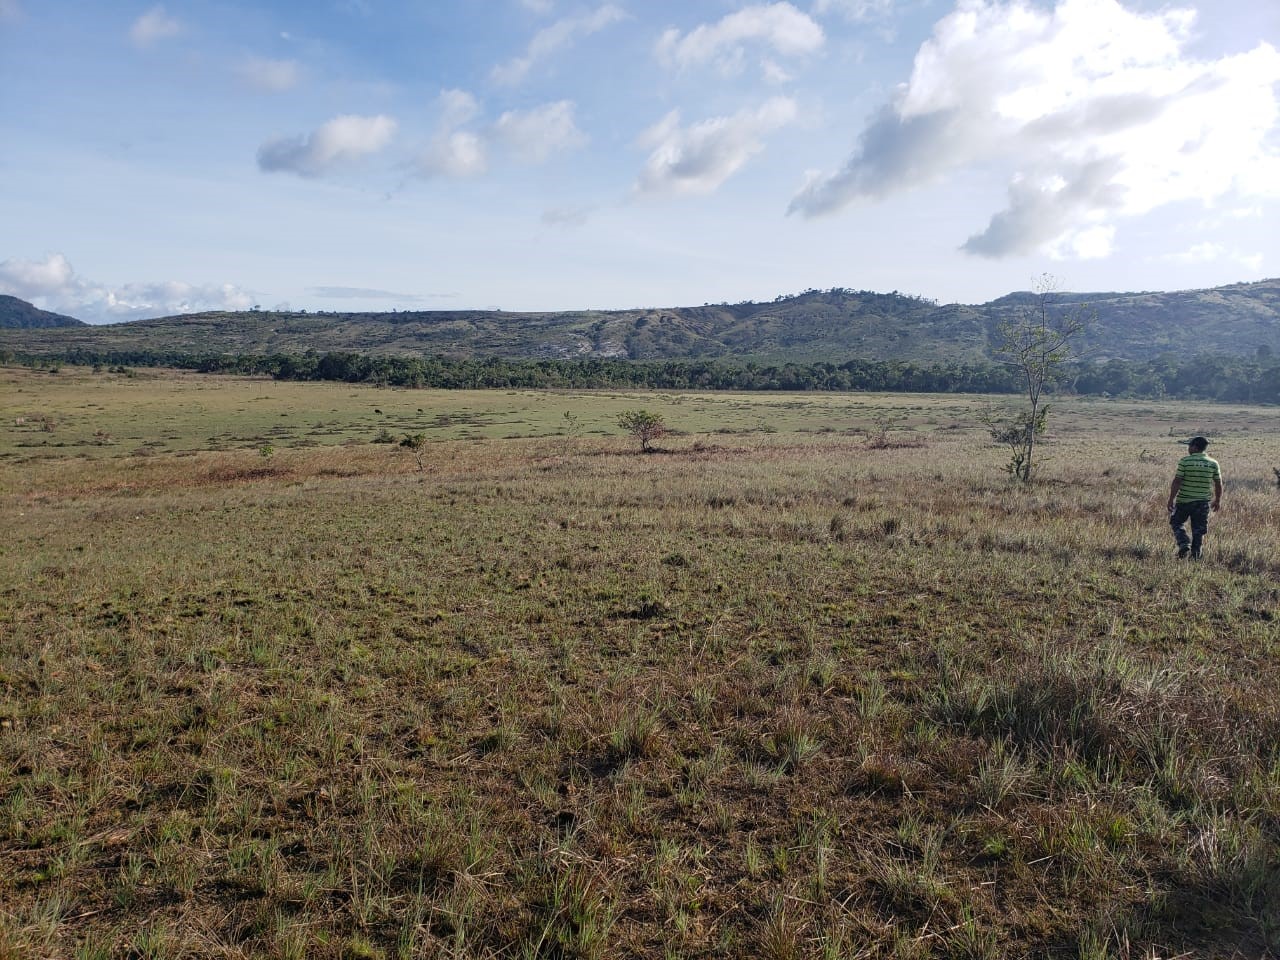 Community plot in Monkey Mountain proposed by the villagers for agricultural development